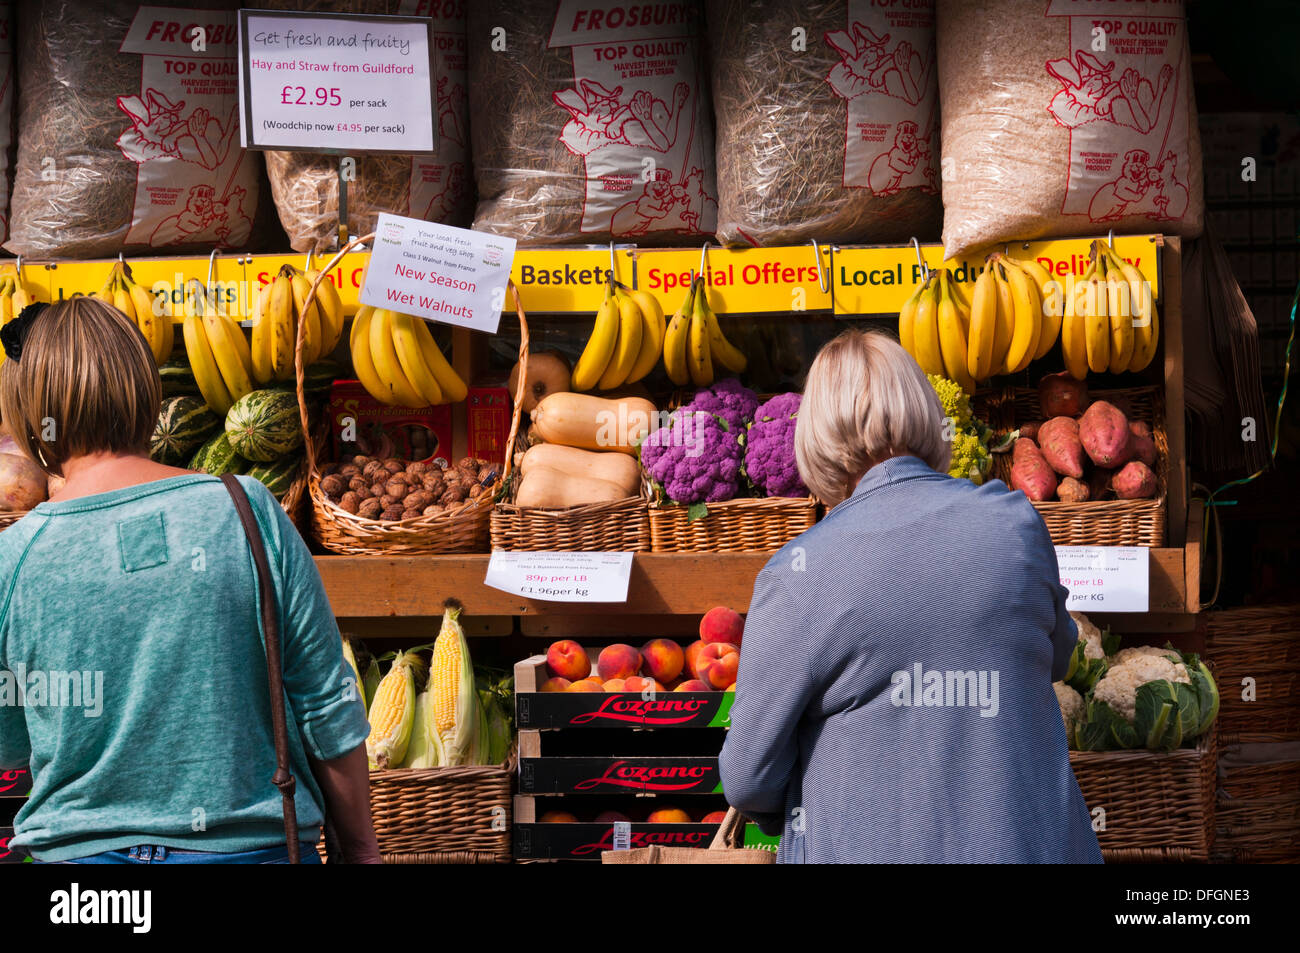 Women Browsing Outside A greengrocers Fruit and Veg Shop Display UK Stock Photo